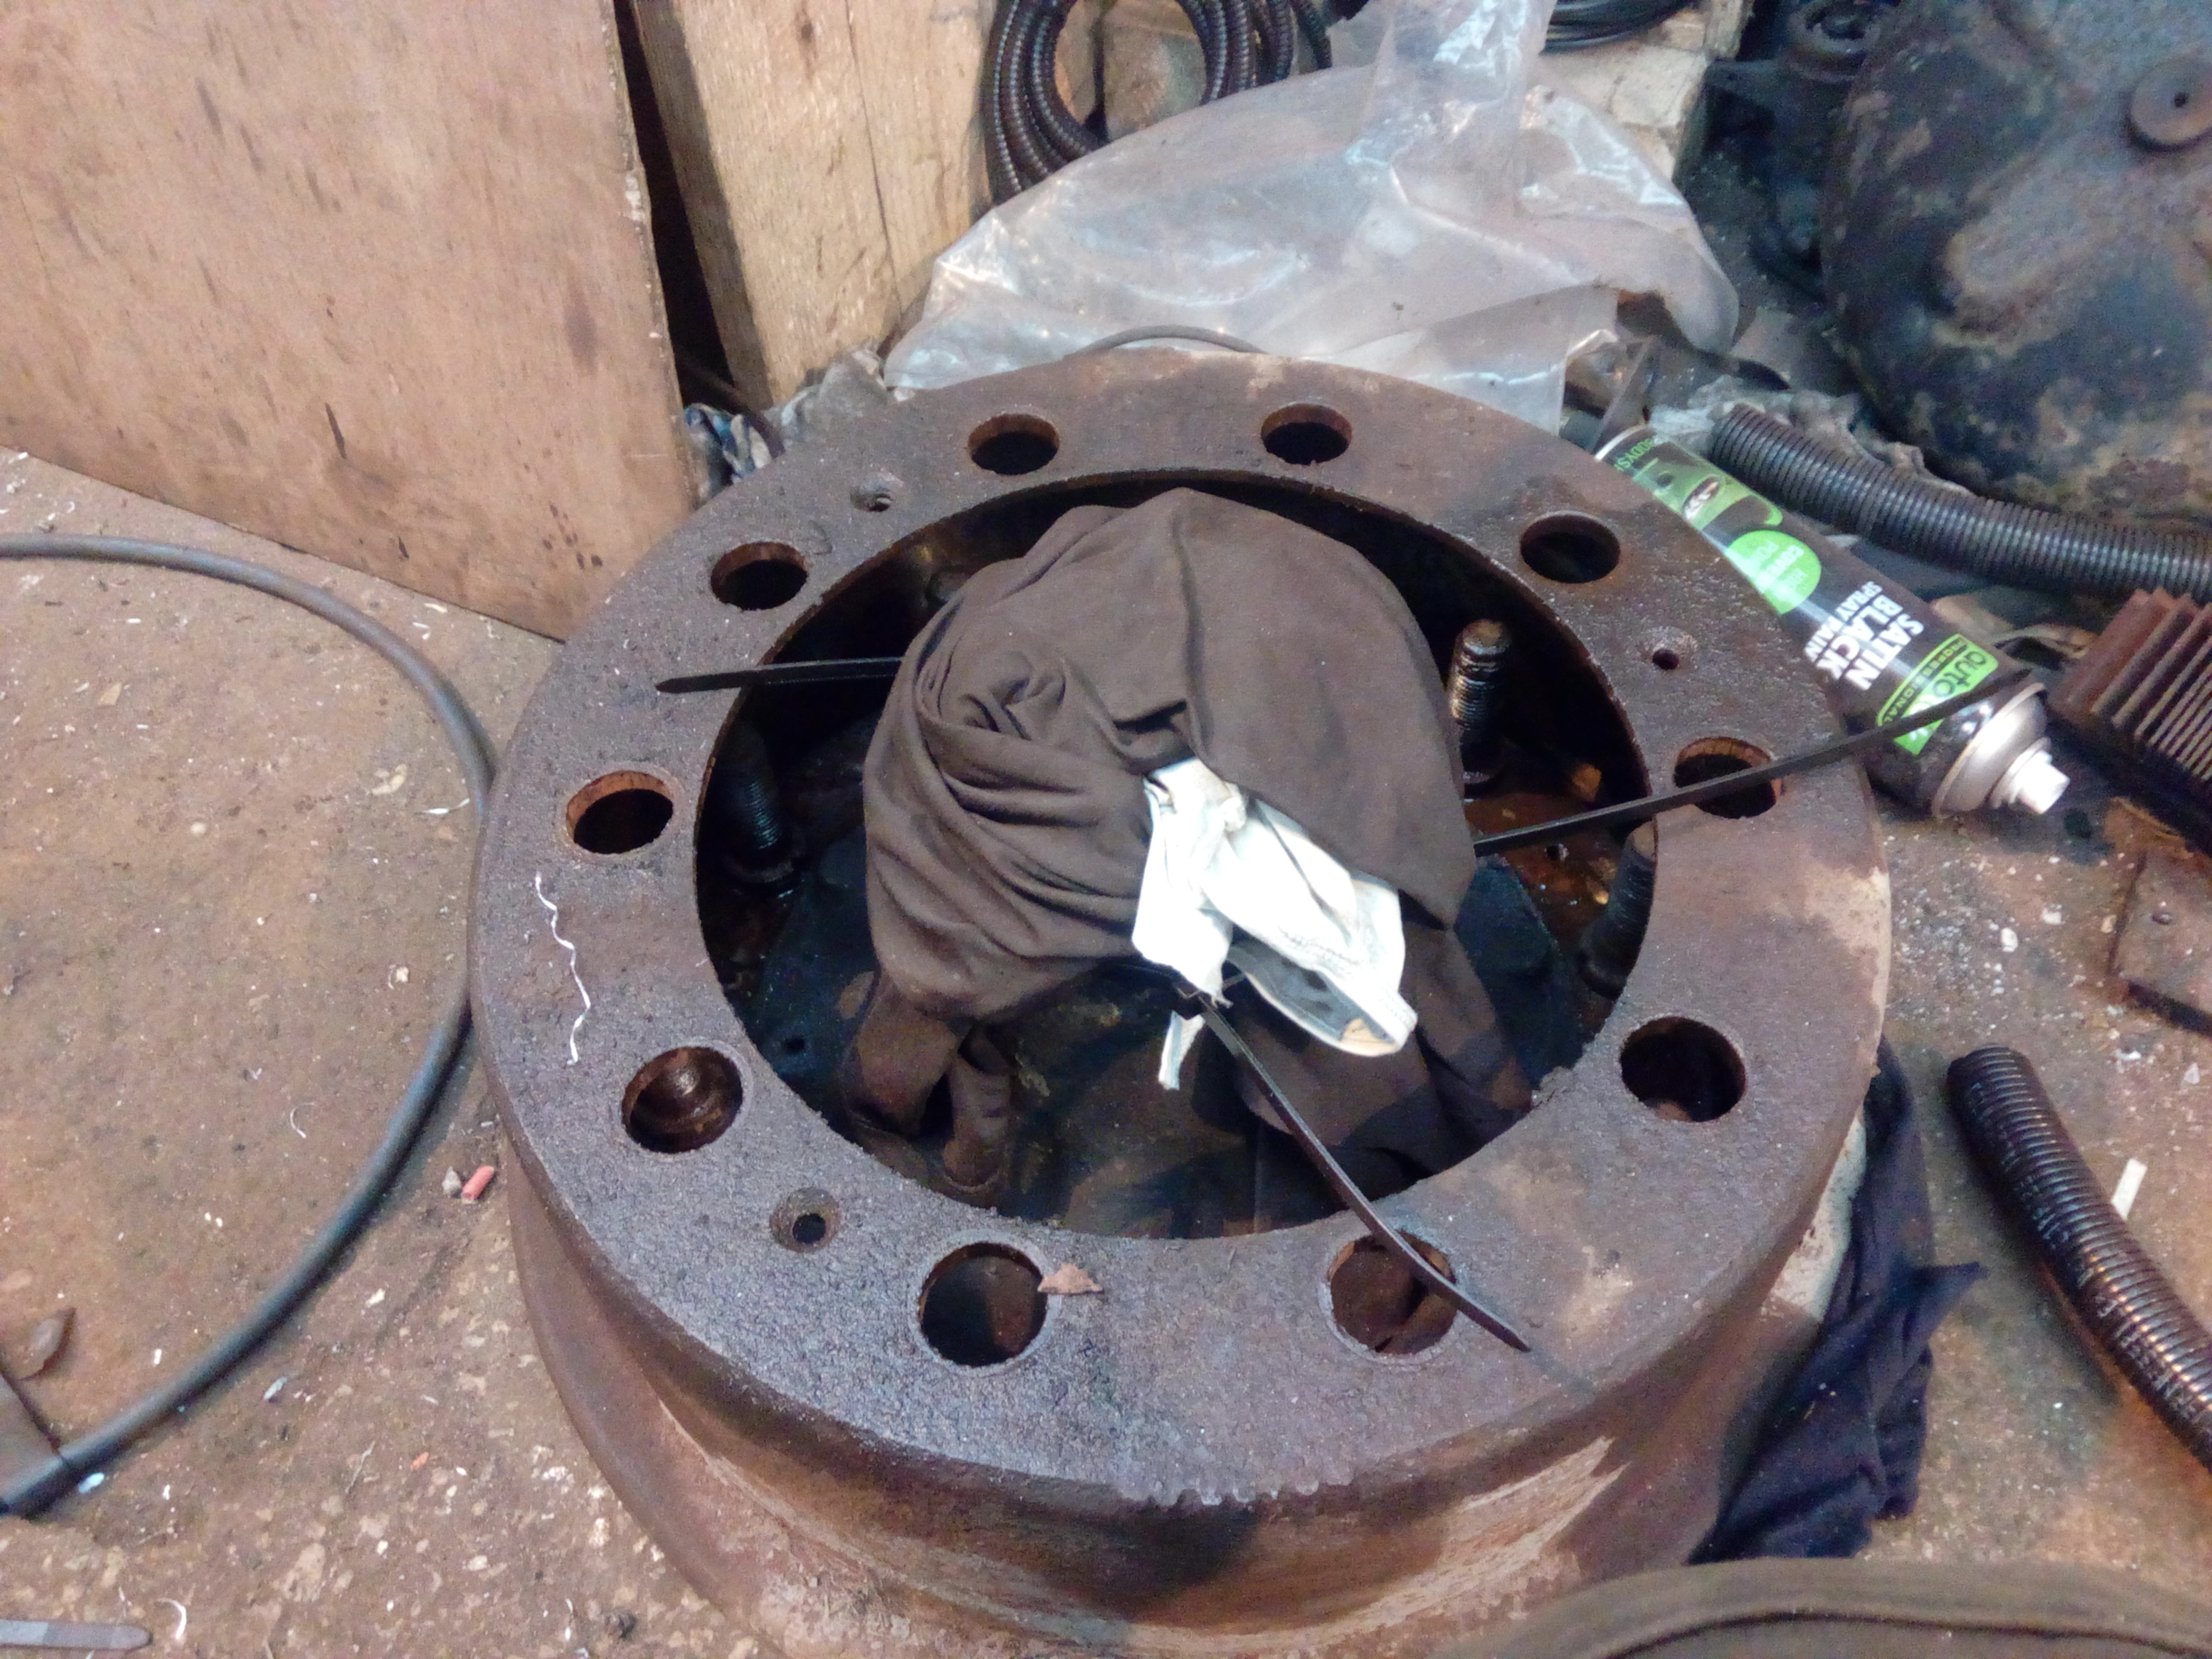 A brake drum on the workshop floor, with the hub dropped down
inside it, and the bearings protected by rags.